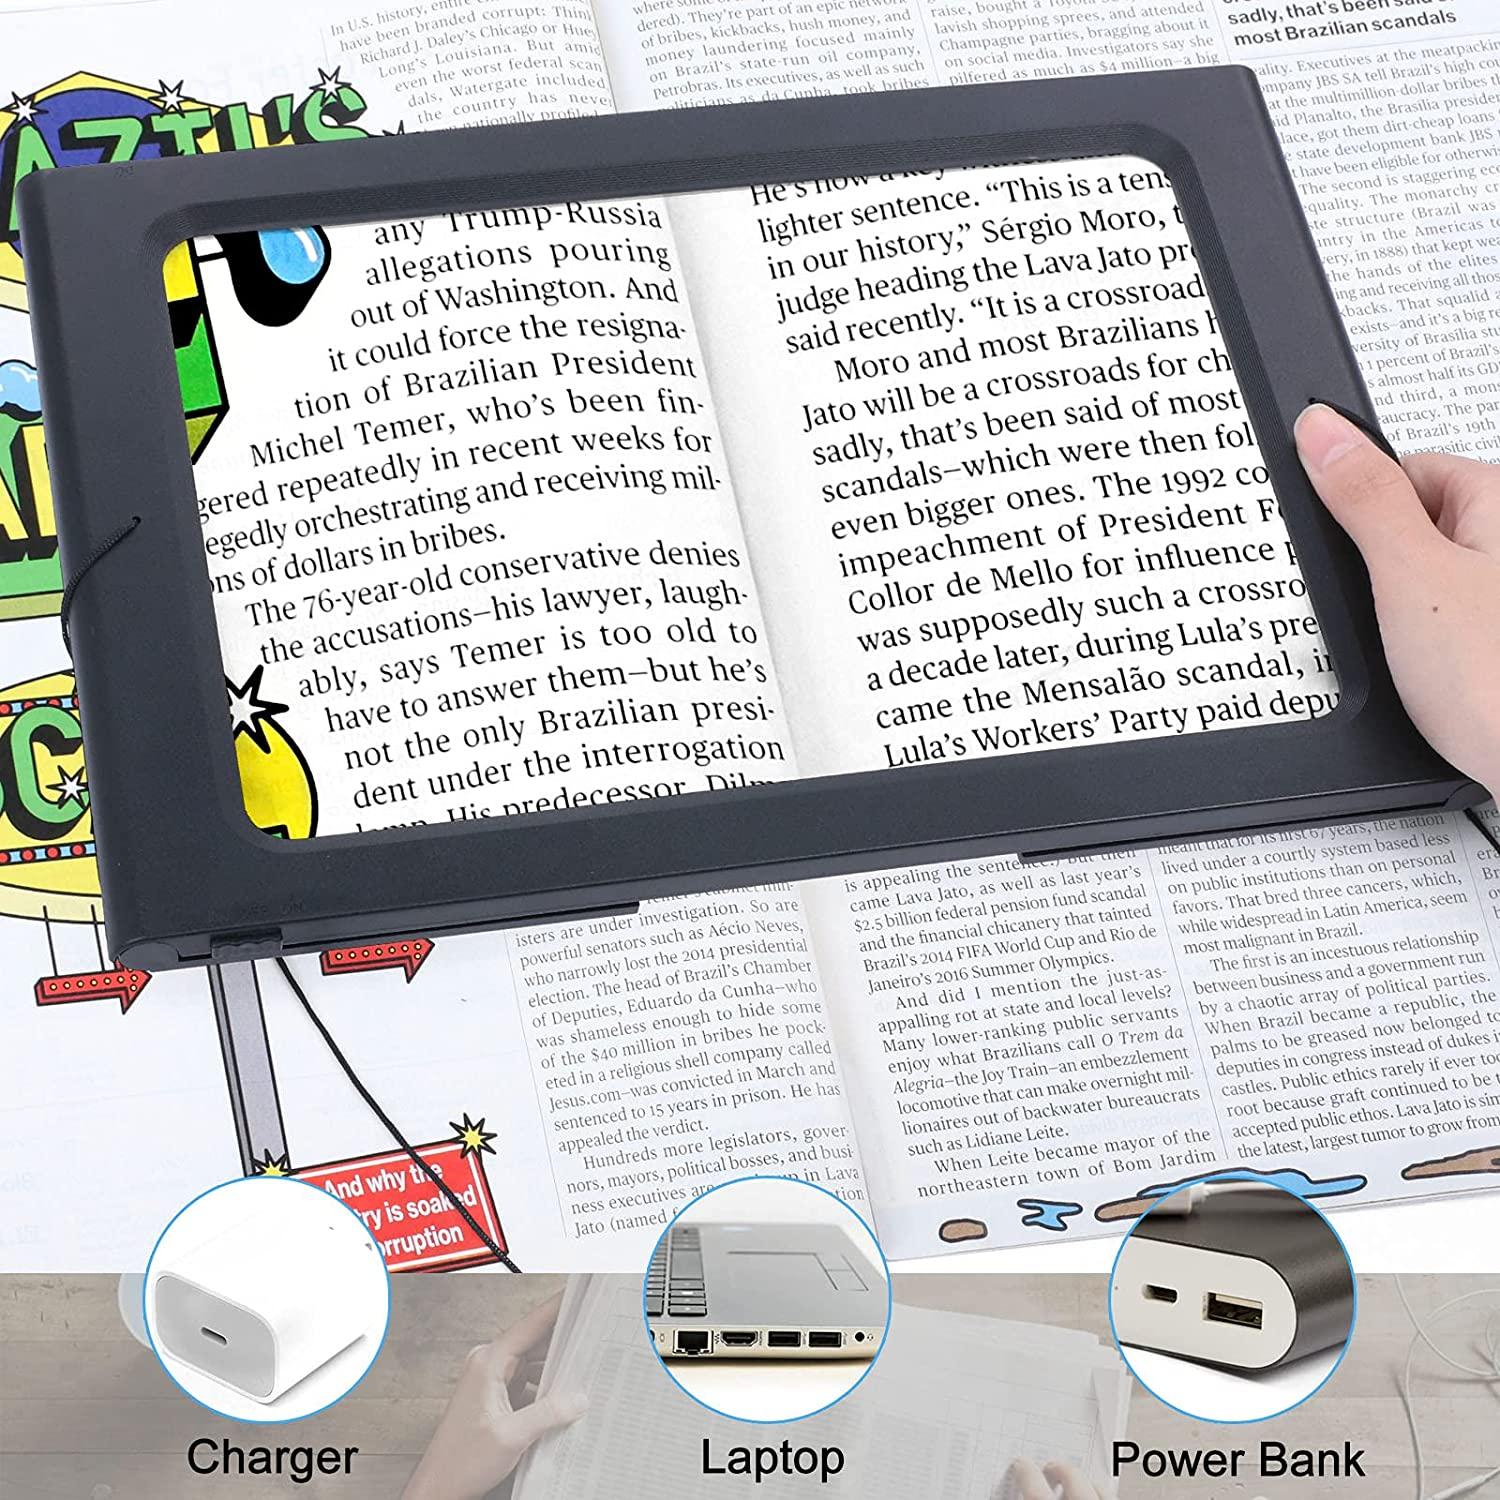 Large A4 Hands Free Reading Glass Lens Book Page Magnifying Glass